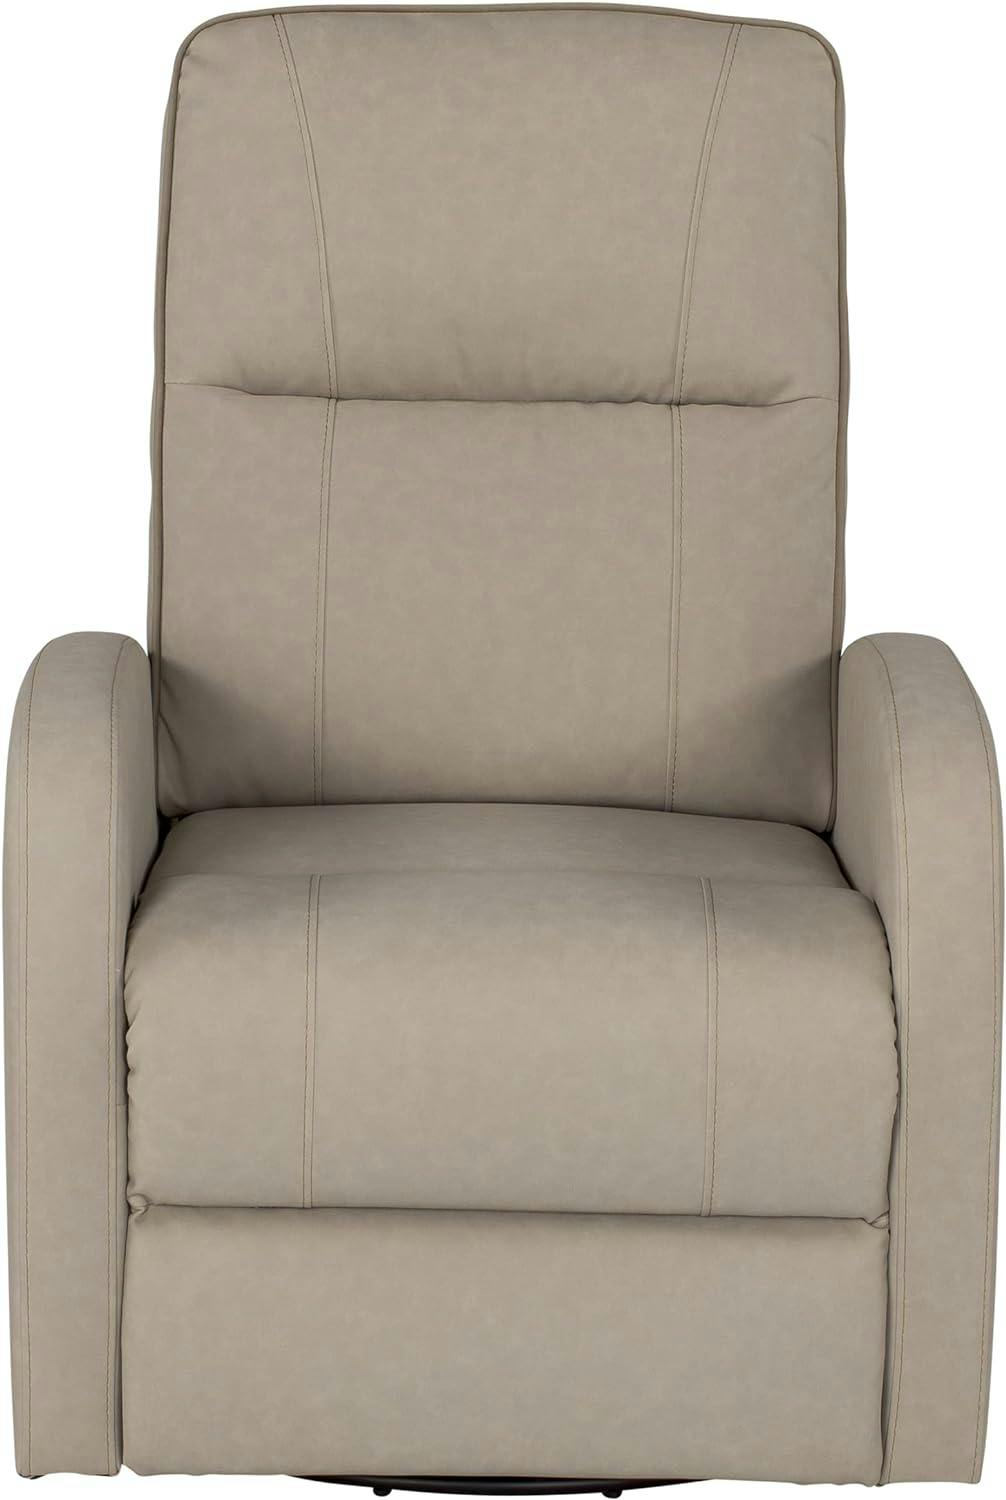 Beige Leather Swivel Pushback Recliner Armchair